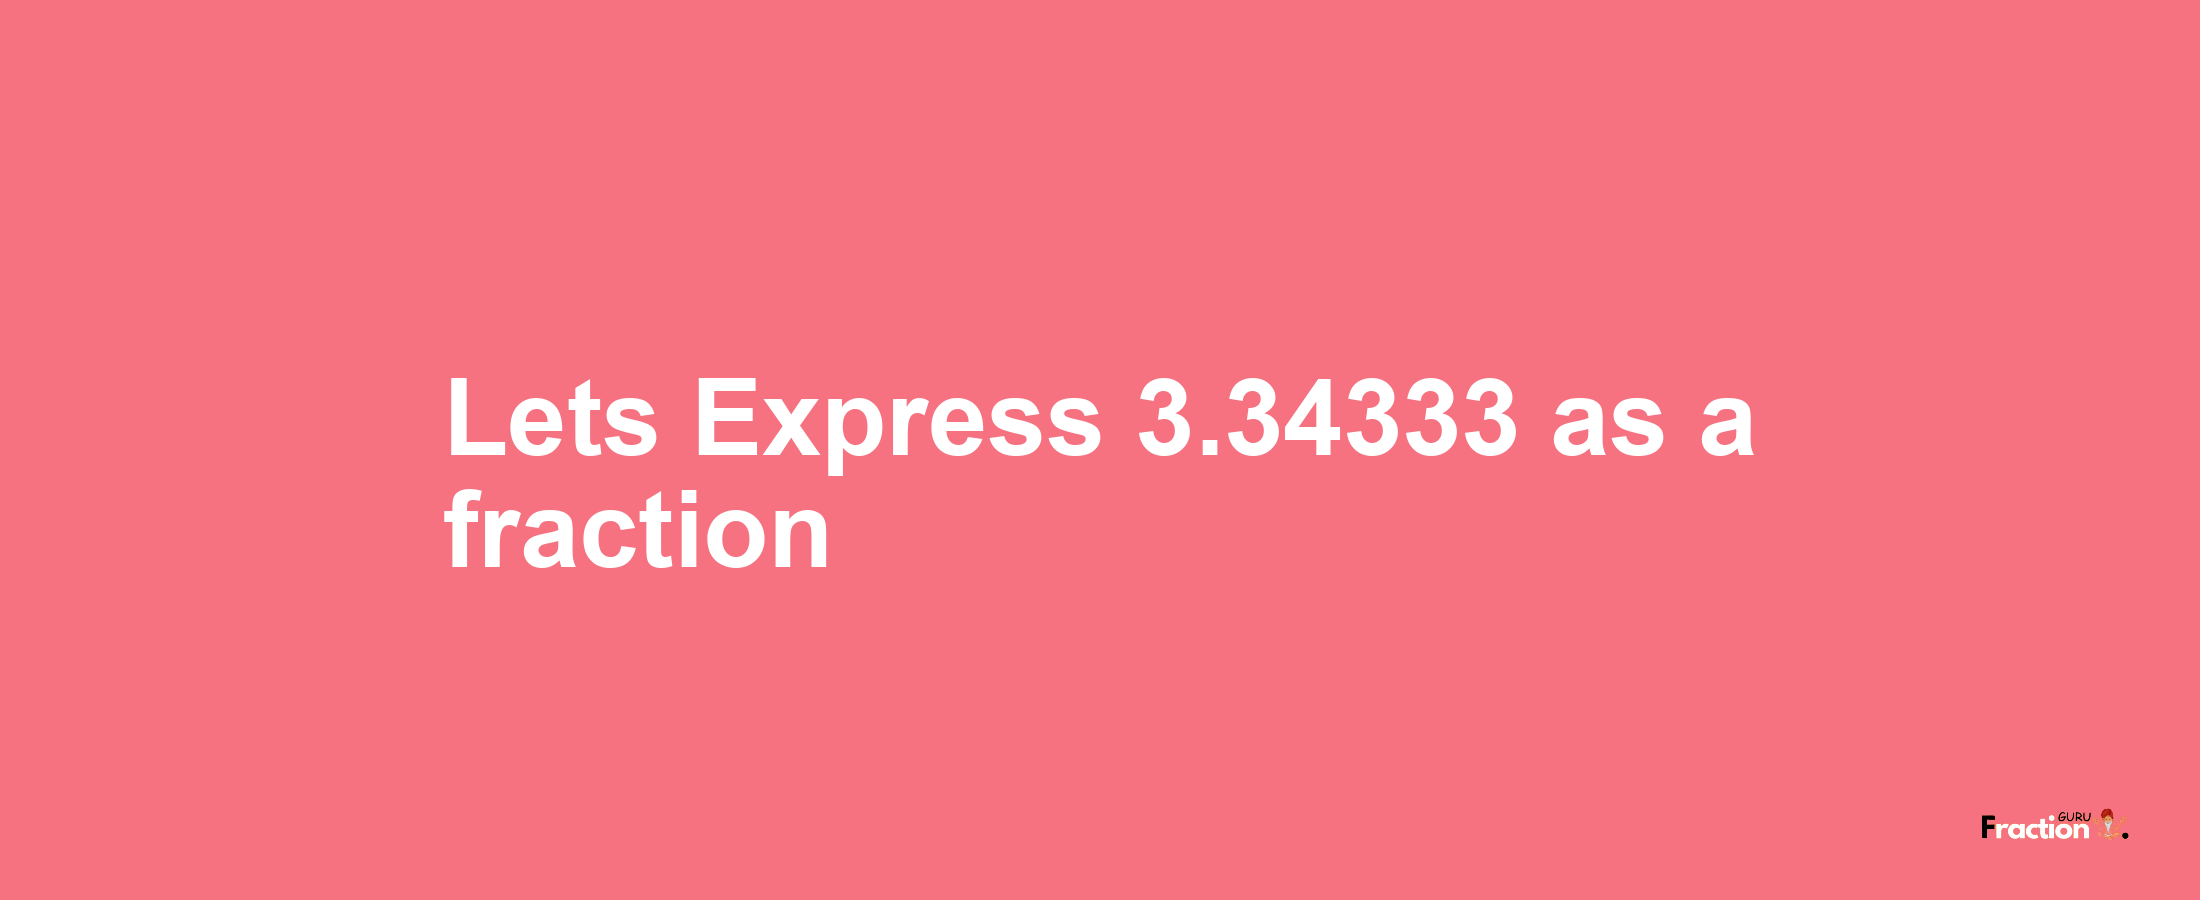 Lets Express 3.34333 as afraction